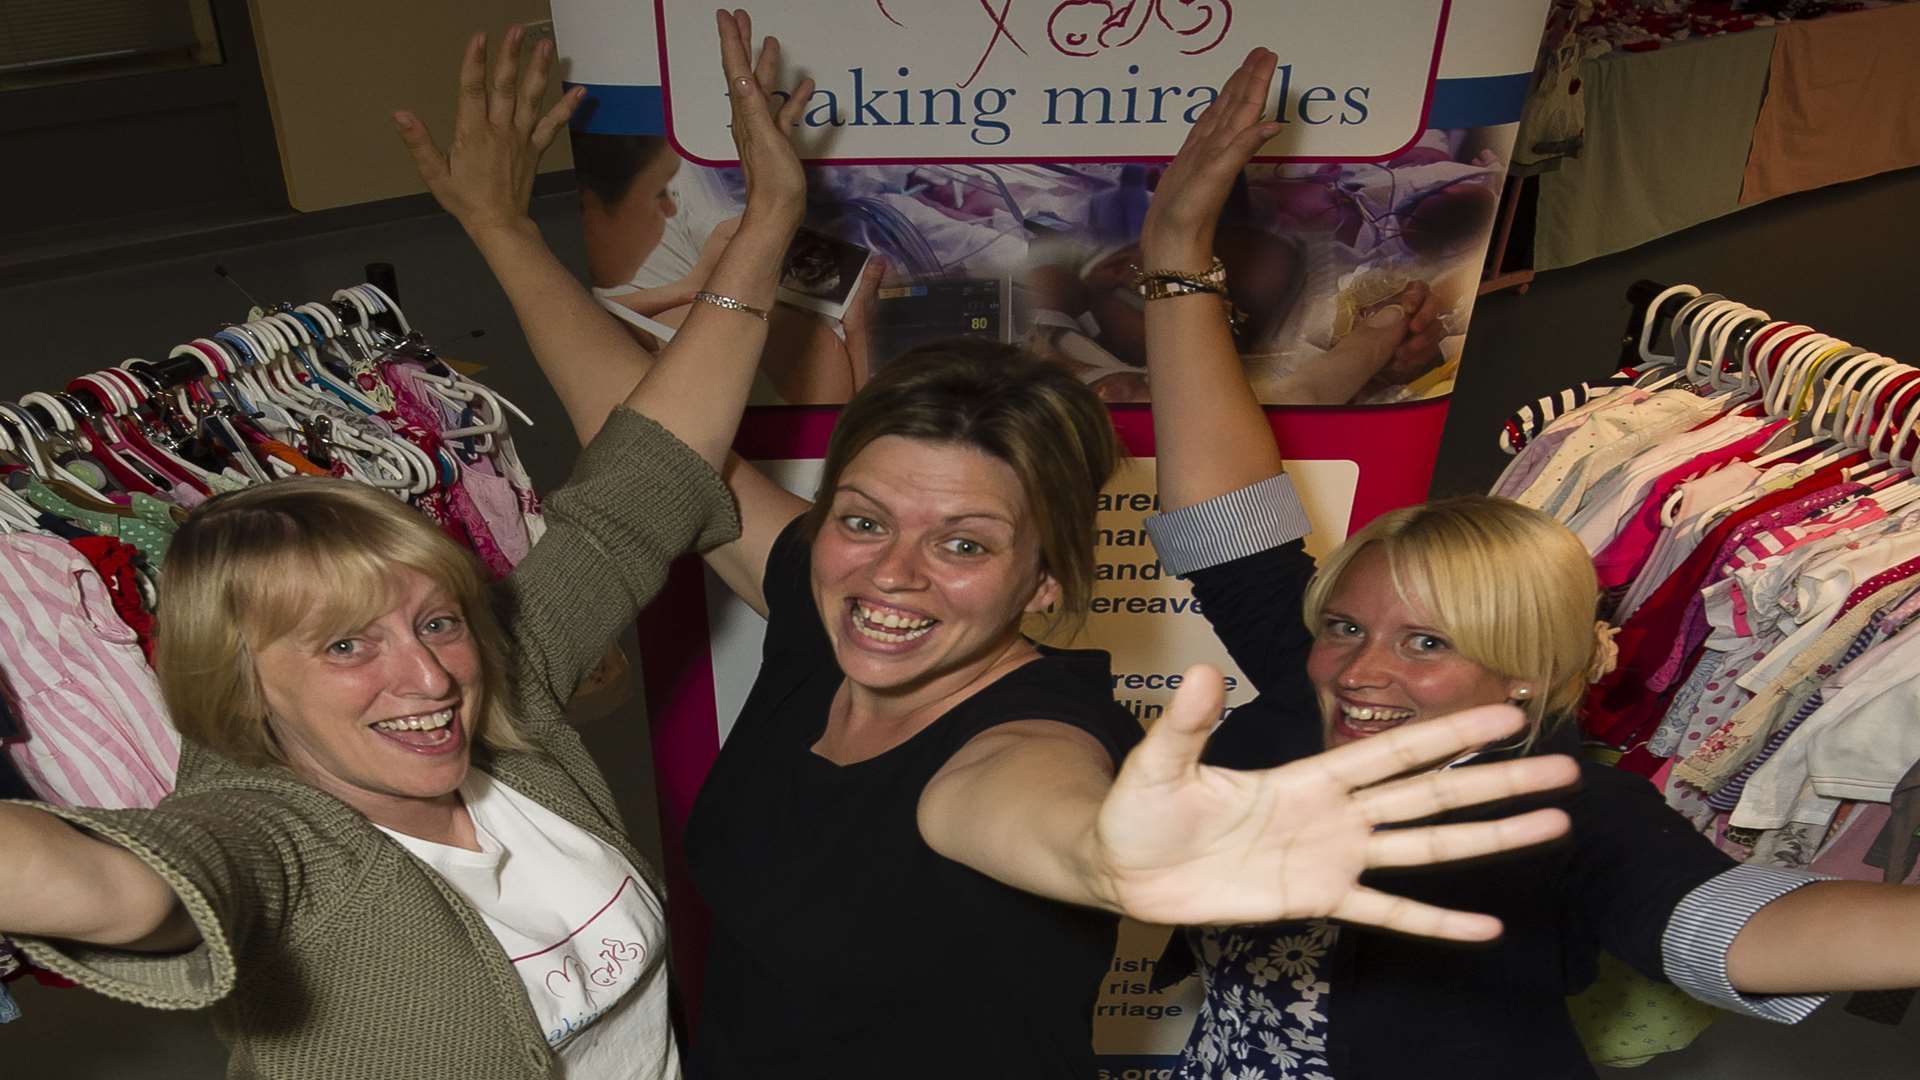 From left,Making Miracles trustees Sally Howells, Kelly Wells, and Hayley Spooner.